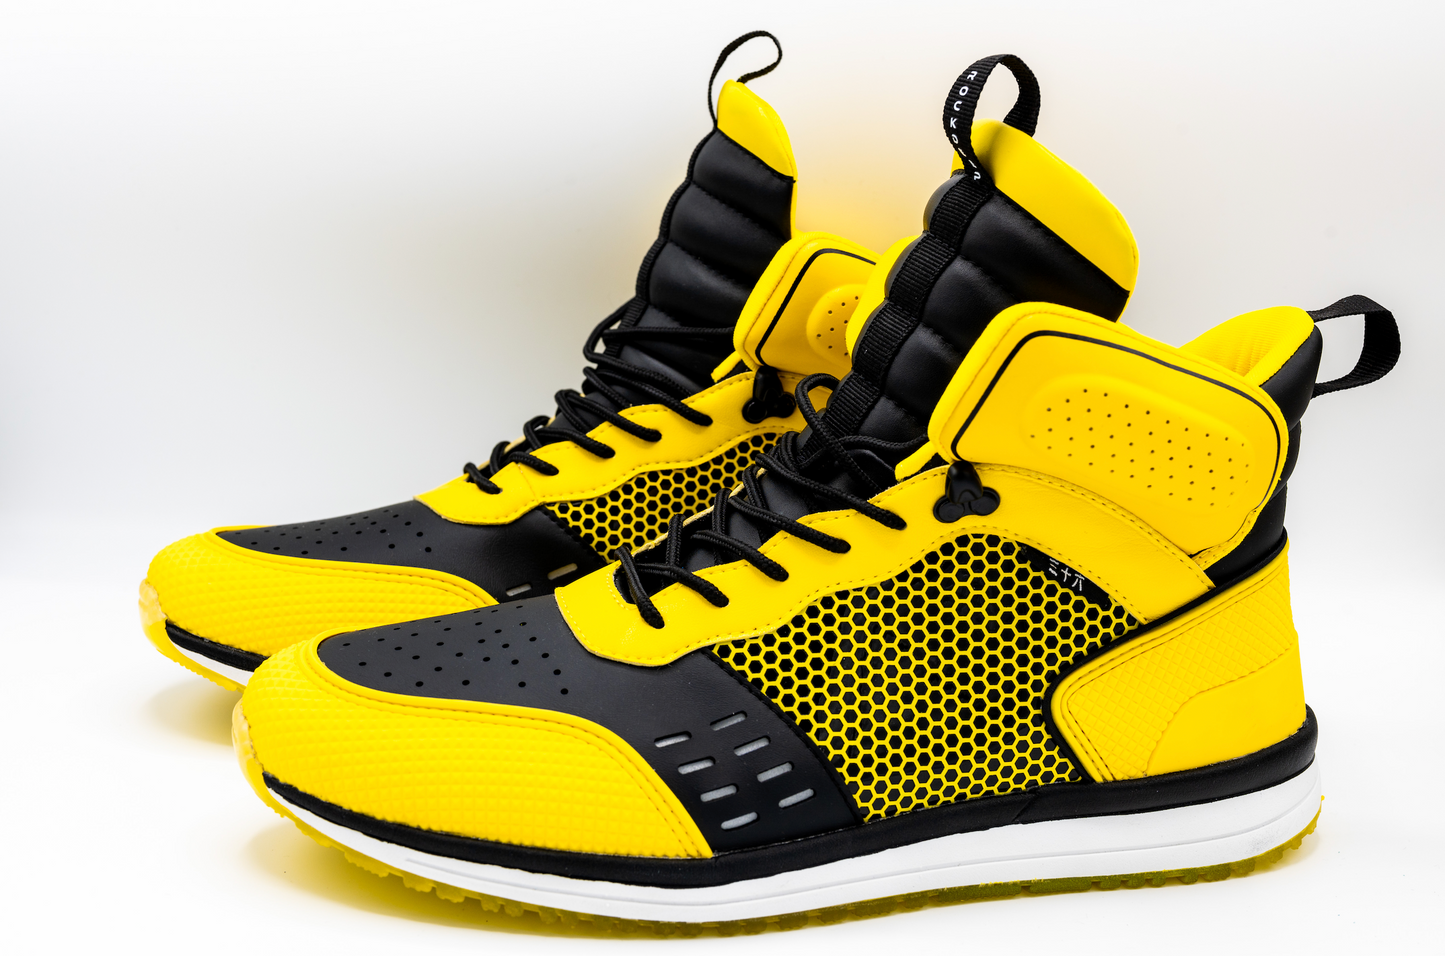 ROCKDEEP INCEPTION Wu-Tang Inspired  Lifestyle Sneaker (1 of 1 Sample)